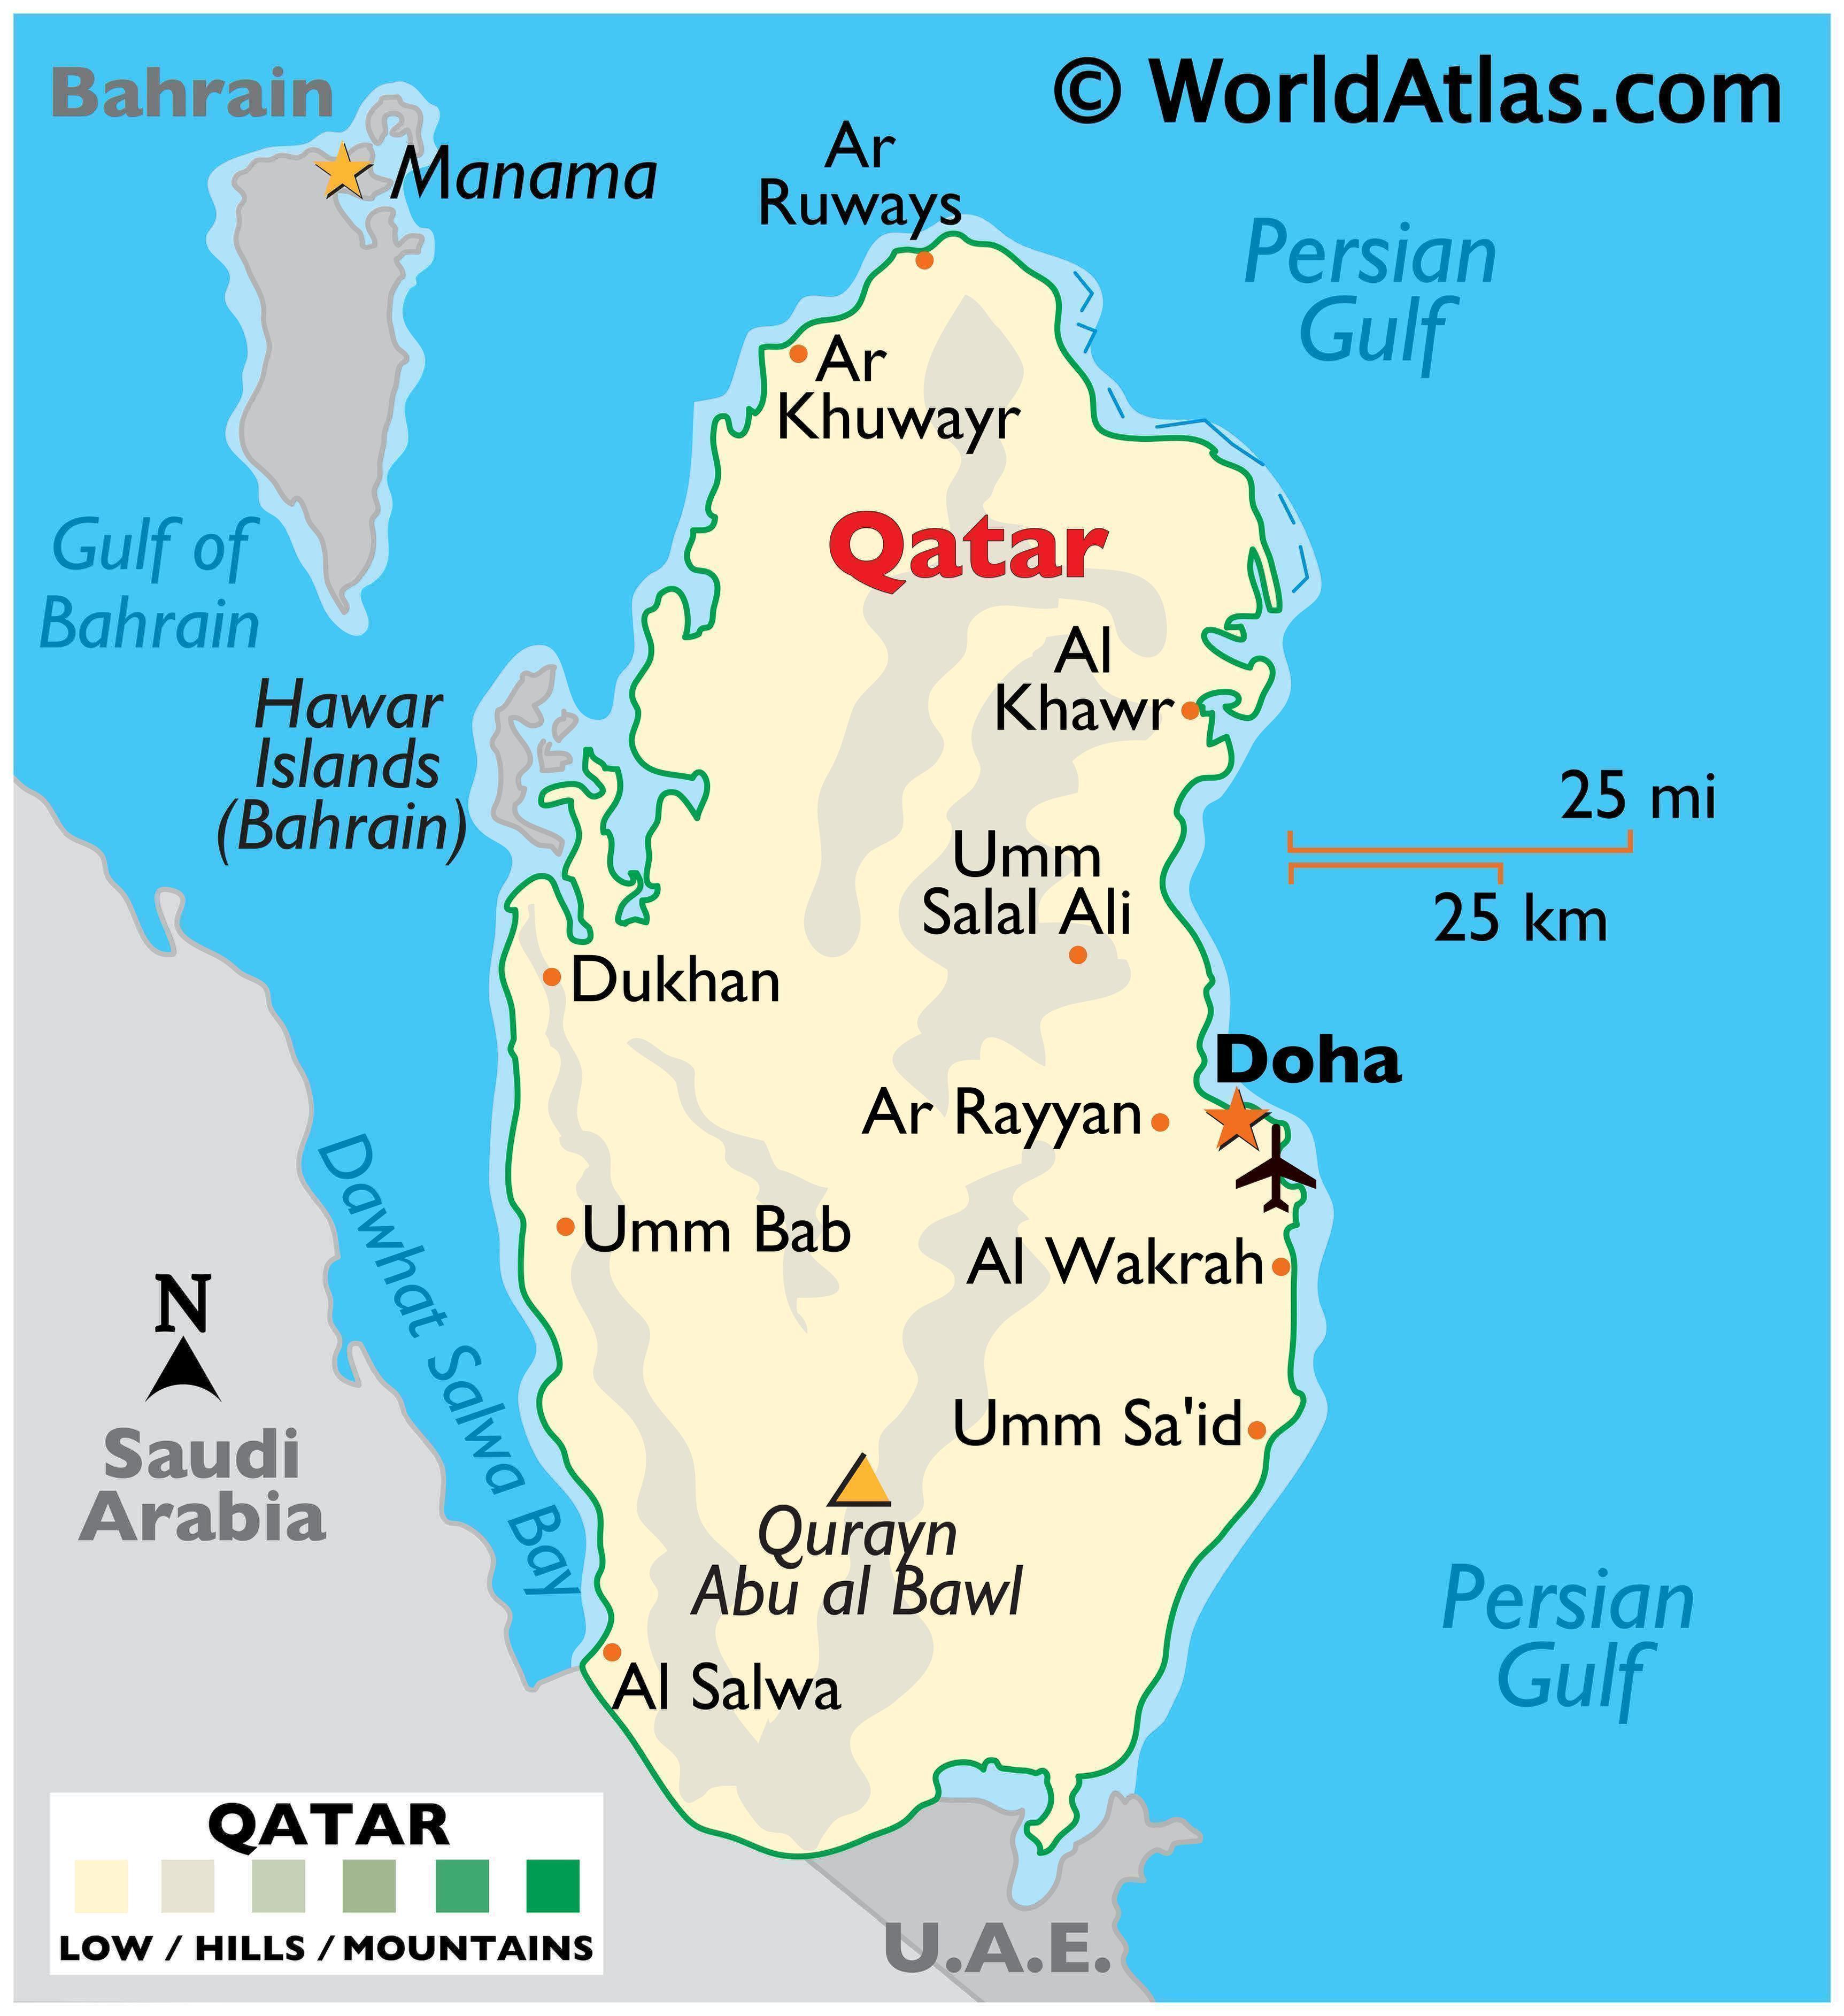 U.S. stands with Qatar's foes, and sells arms to Qatar
